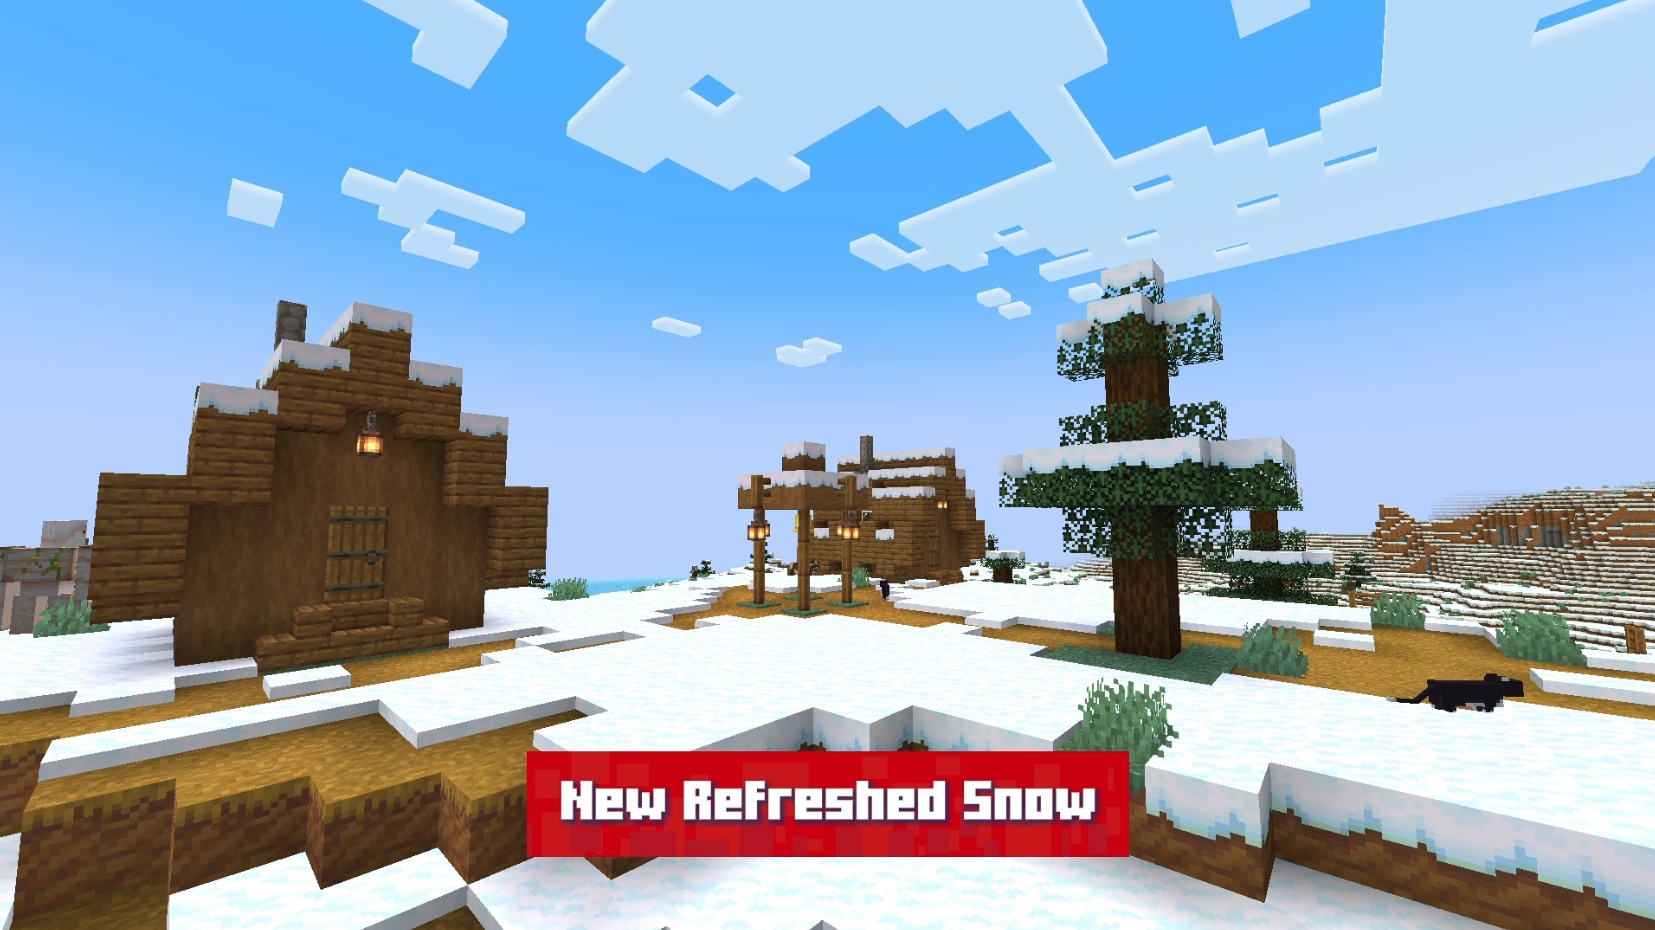 New Refreshed Snow